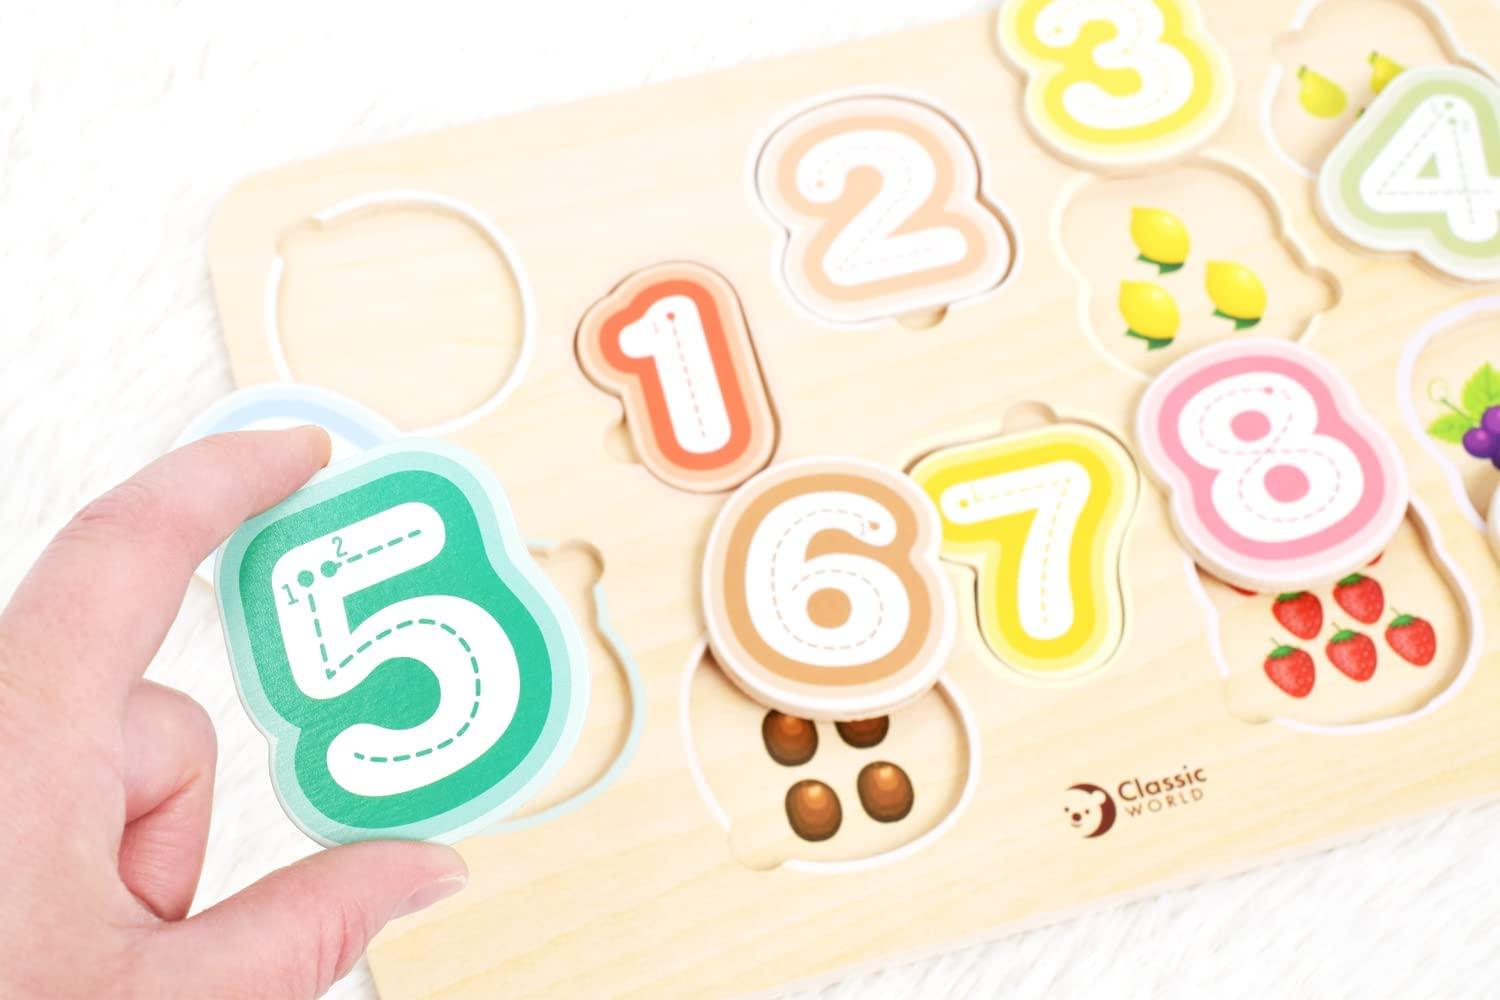 Number Puzzle - MoonyBoon